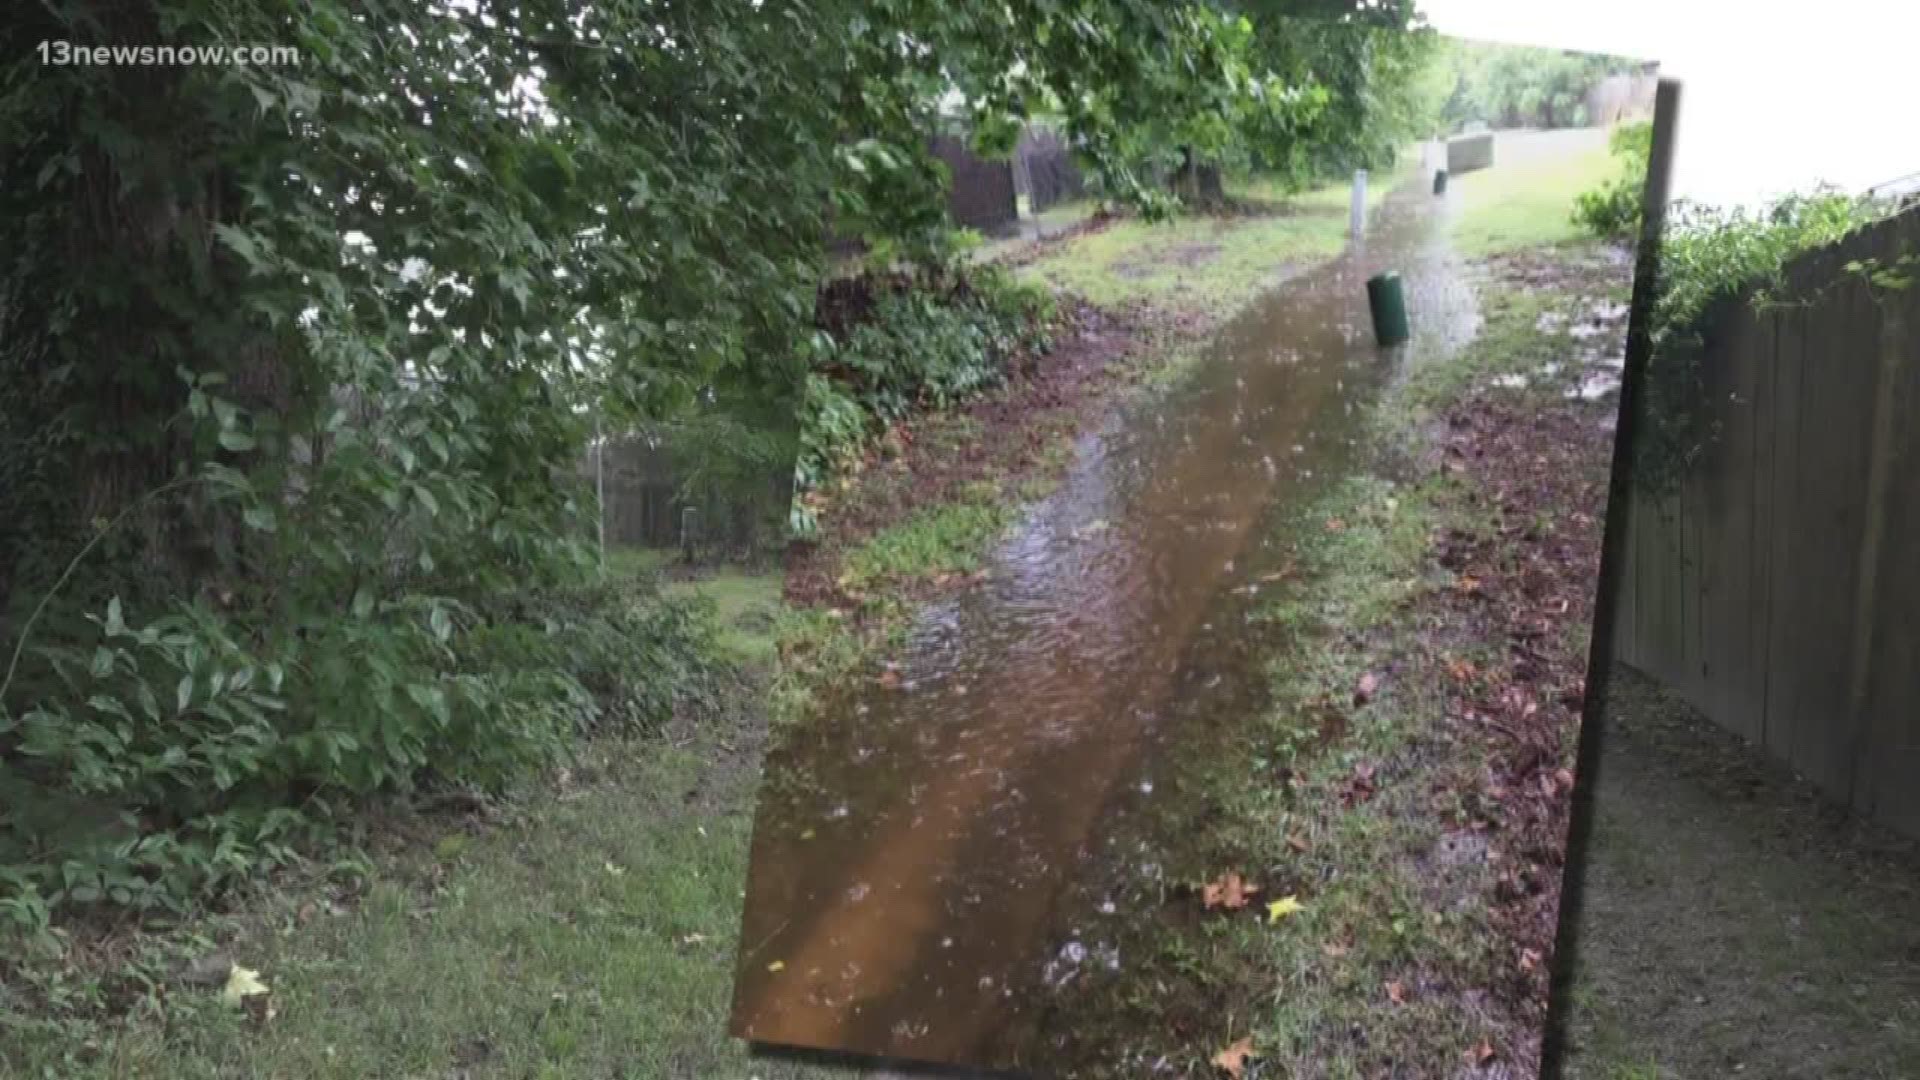 According to neighbors, the ditches flood when it rains, especially when it rains hard, because of debris build-up. The problem keeps getting worse.